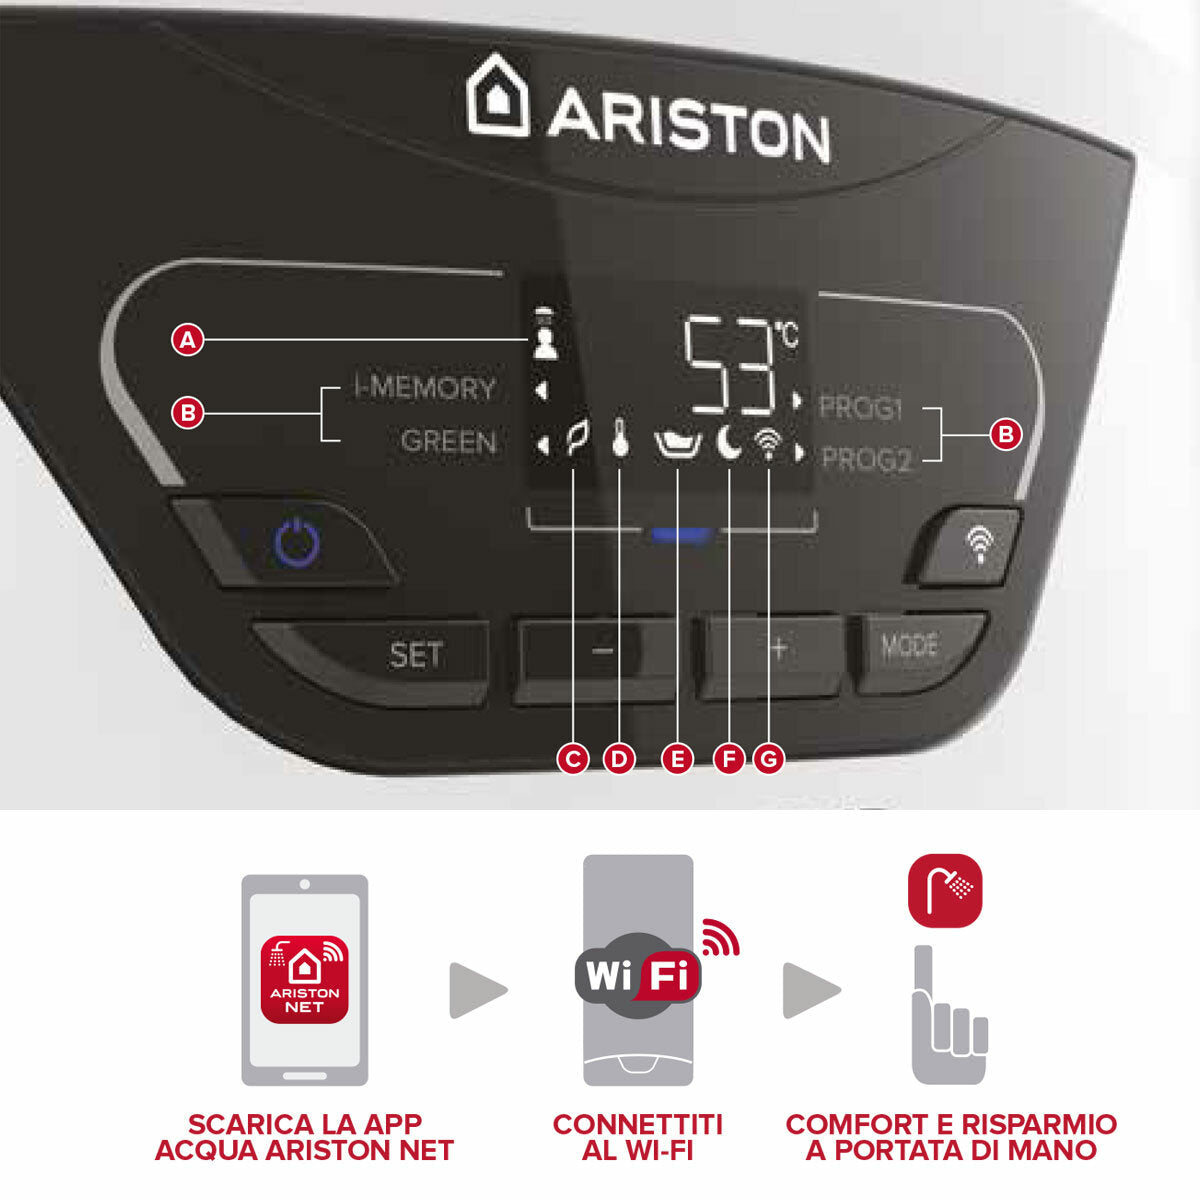 Ariston Lydos Hybrid electric water heater and hybrid heat pump 80 liters with WiFi